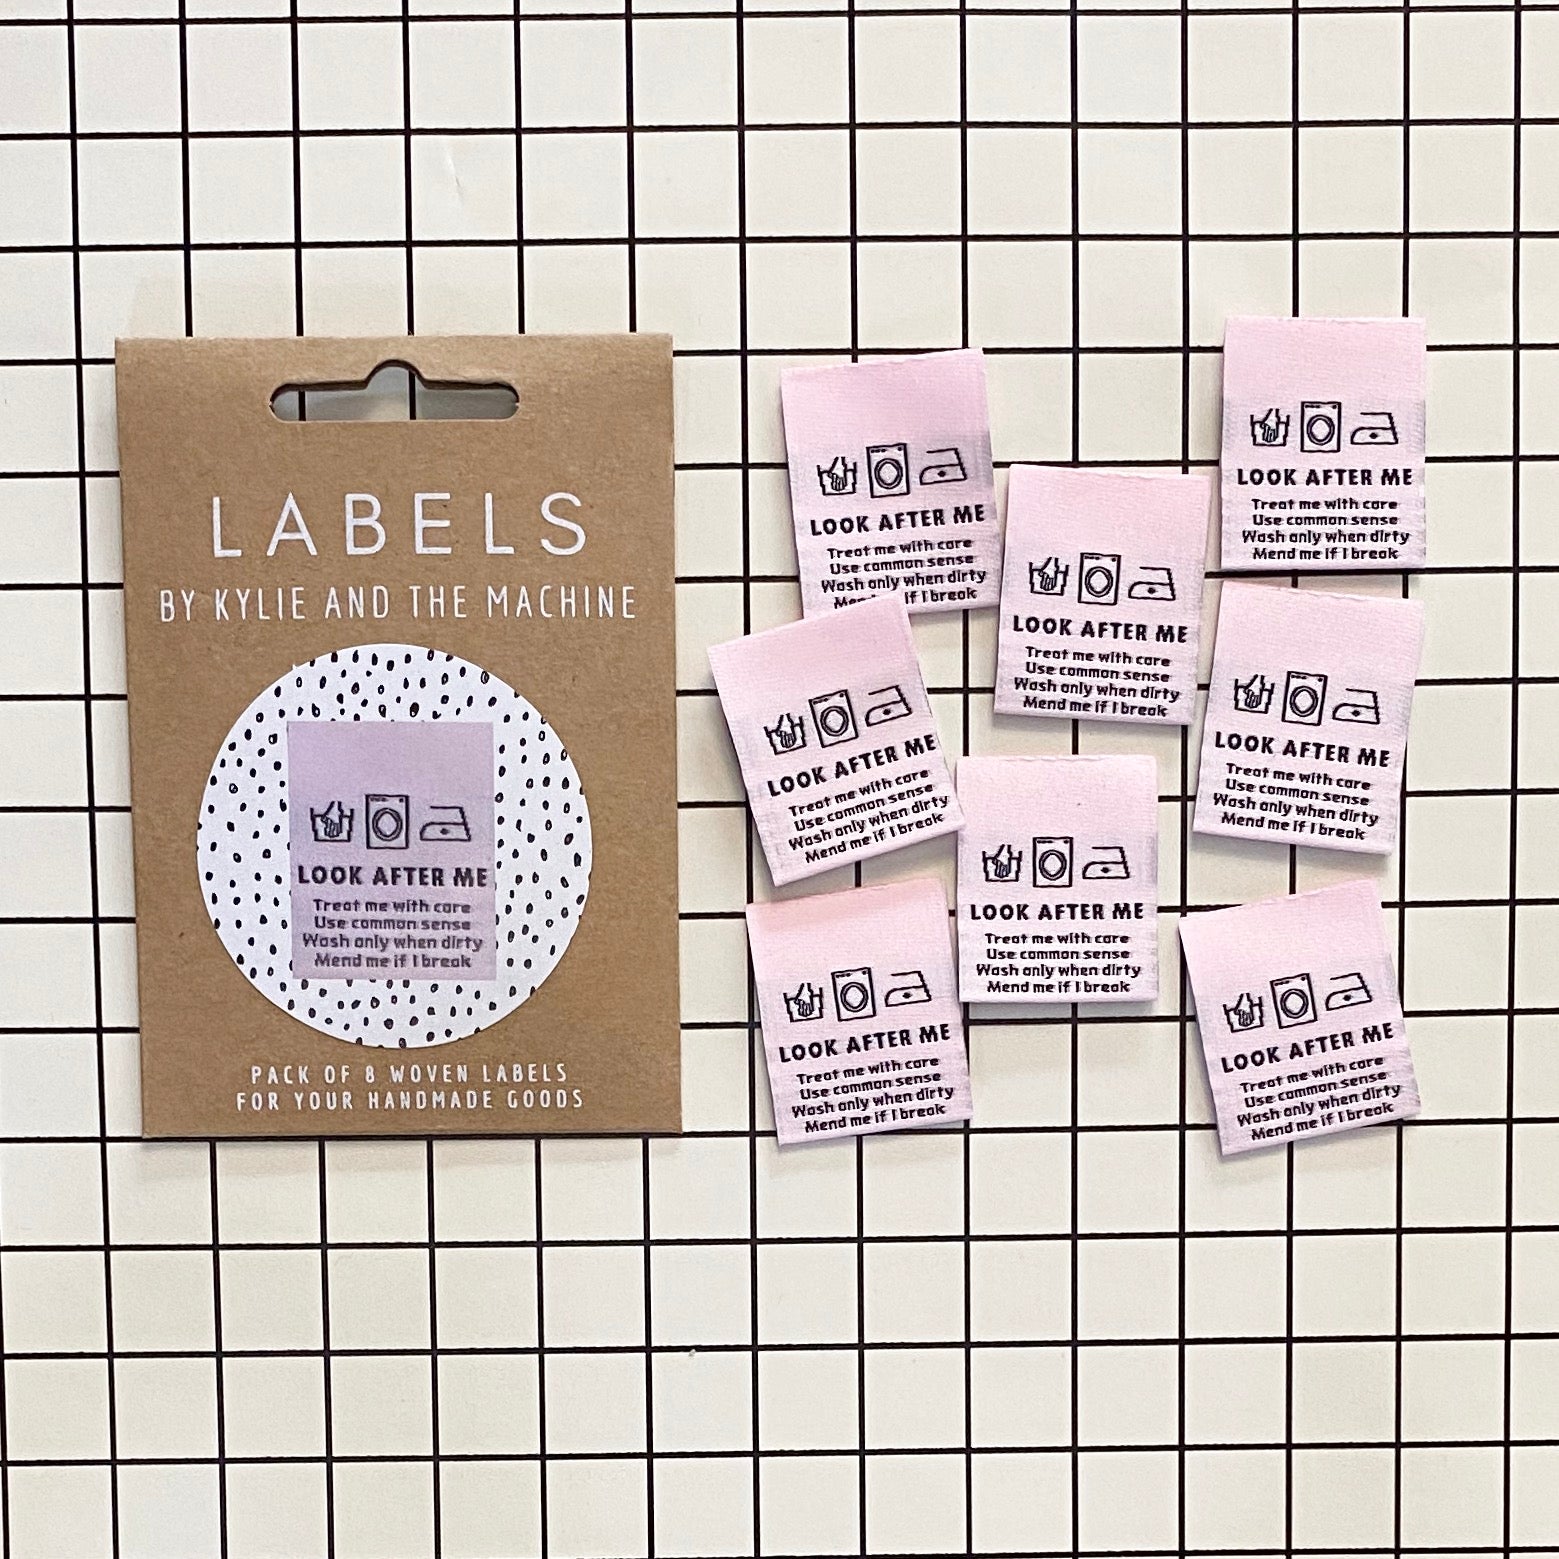 10 Woven Labels - Look after me. - MaaiDesign